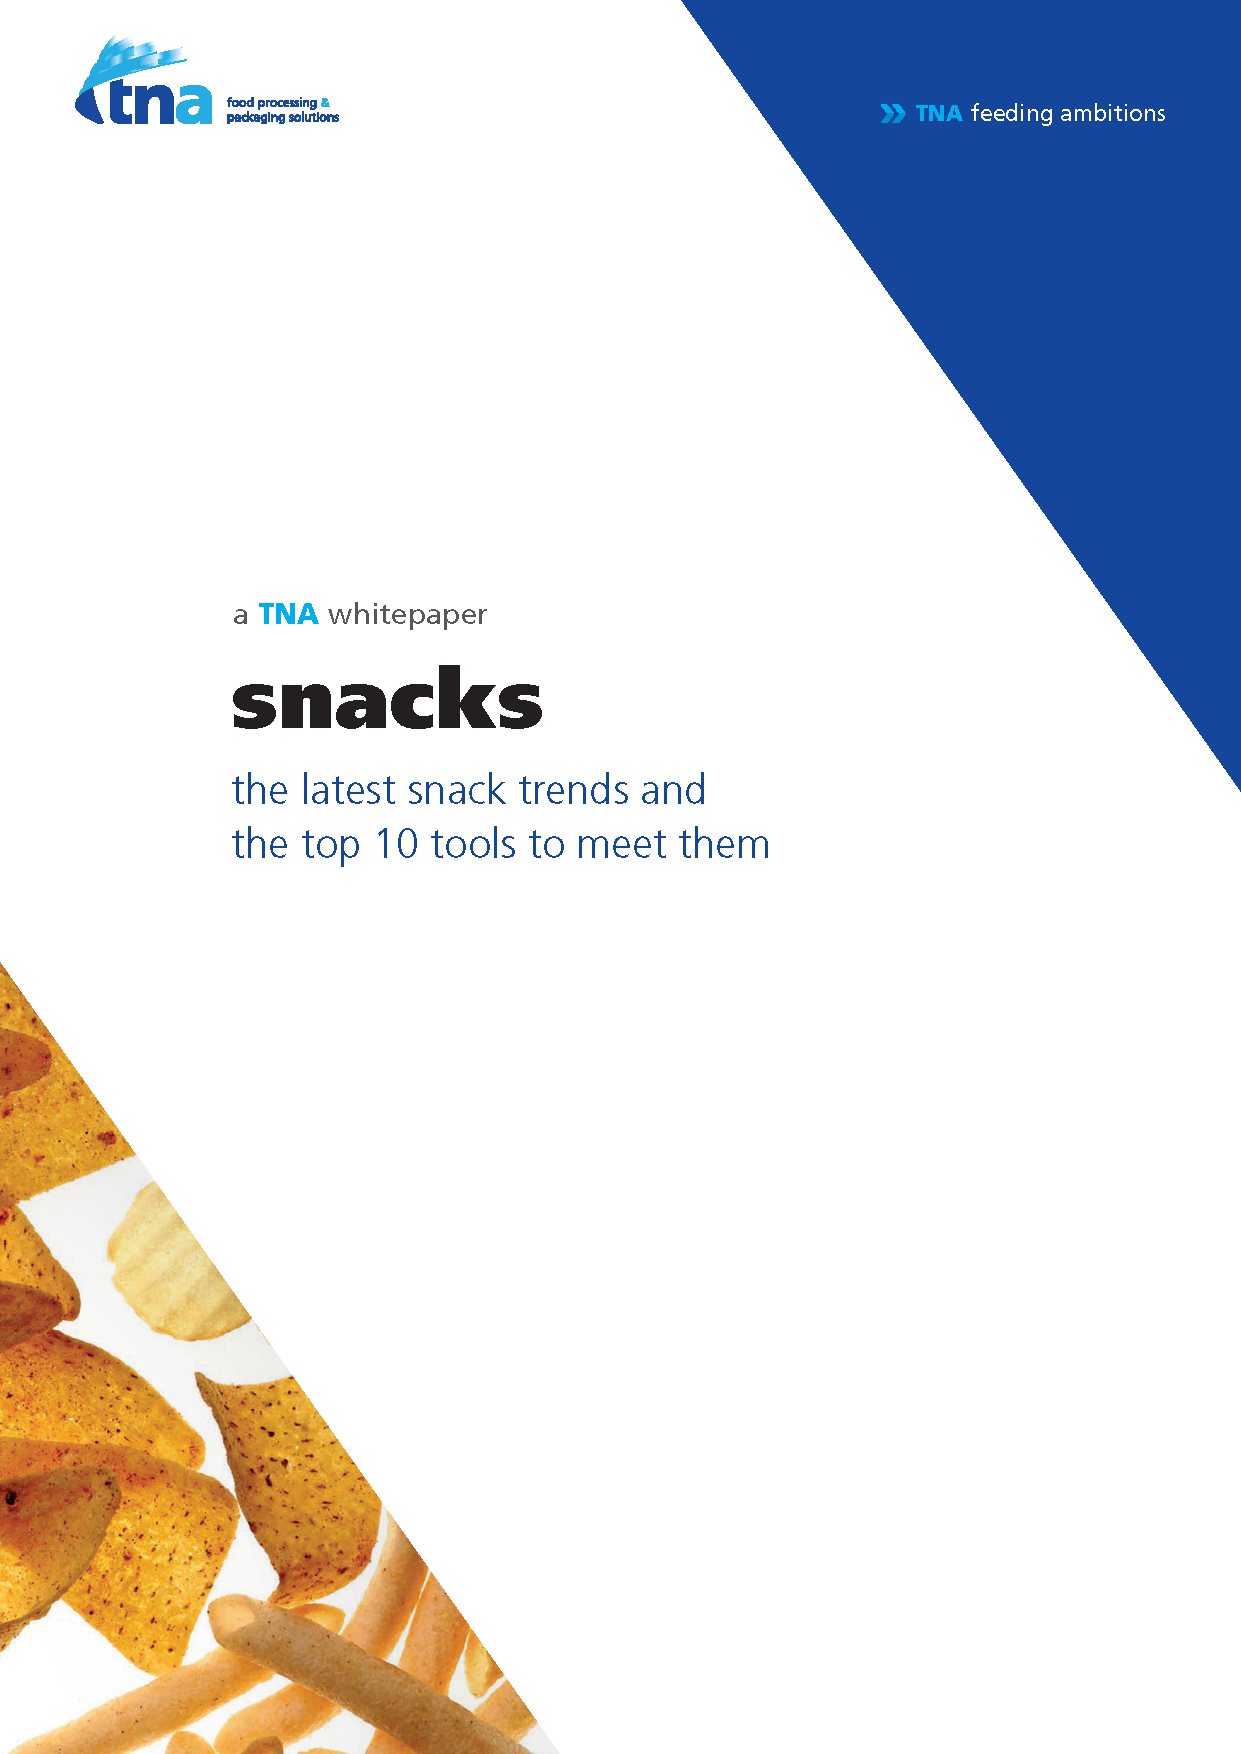 The Latest Snack Trends and the Top 10 Tools to Meet Them